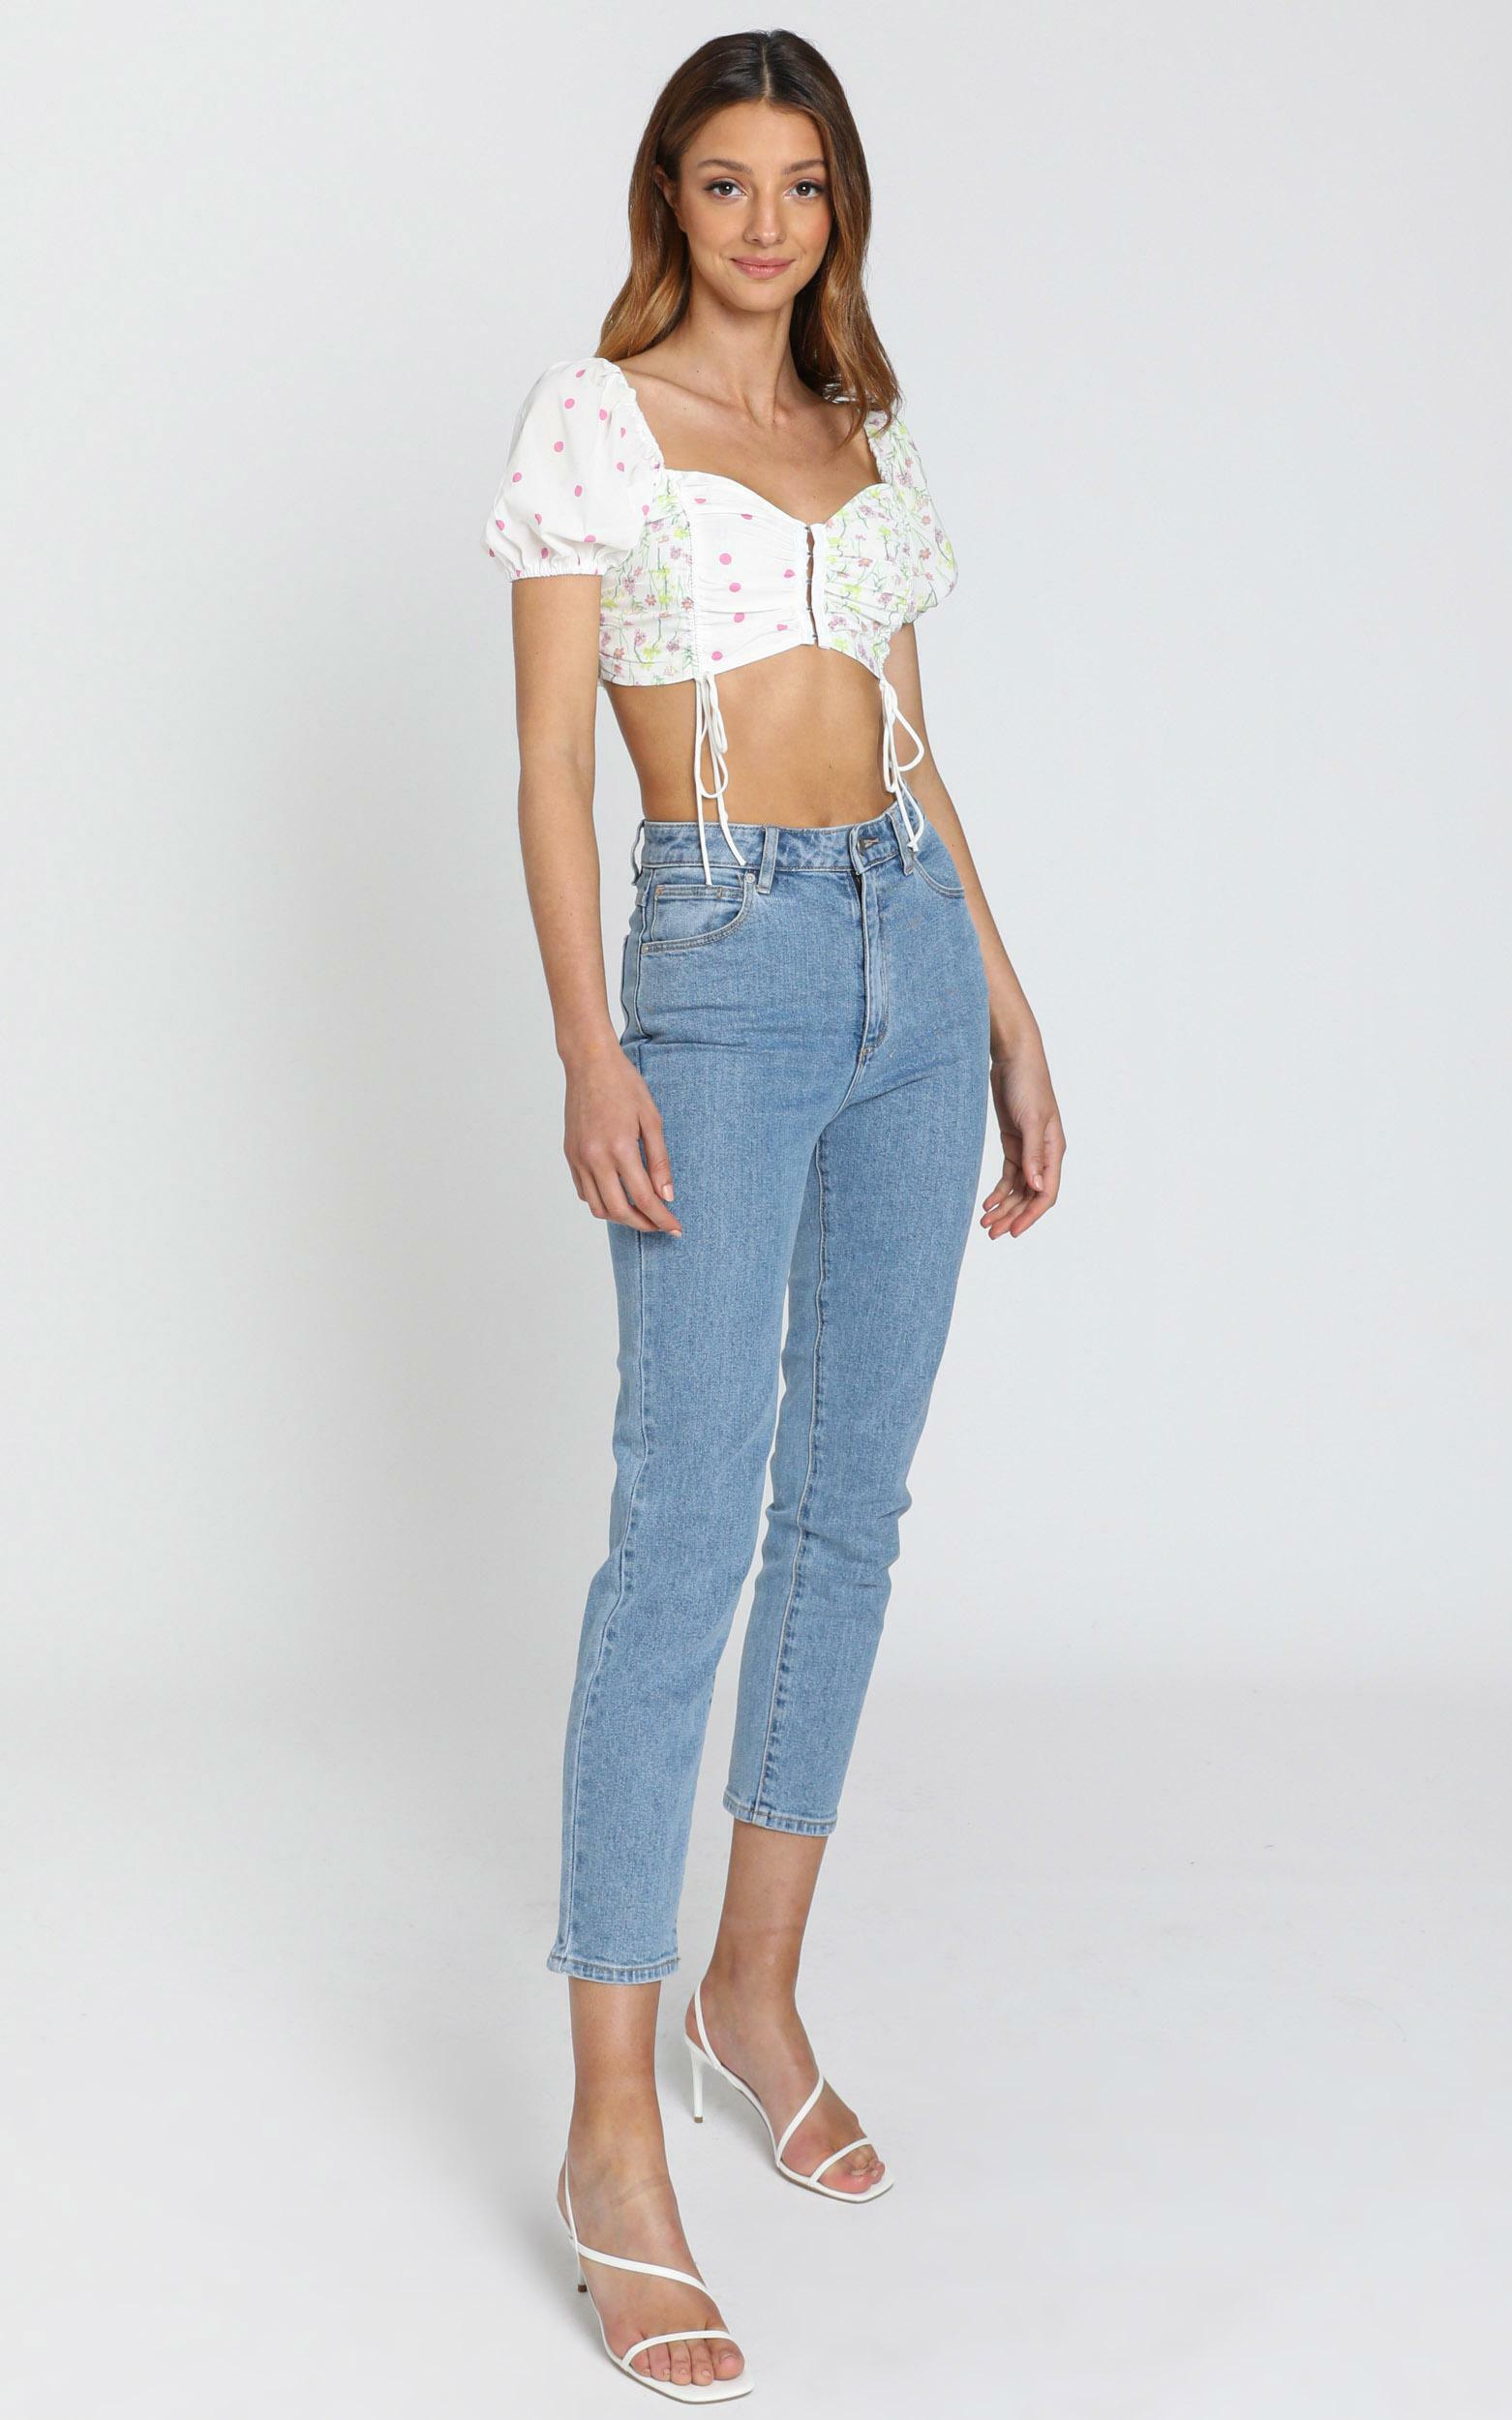 St Tropez Crop Top in pink floral - 8 (S), White, hi-res image number null